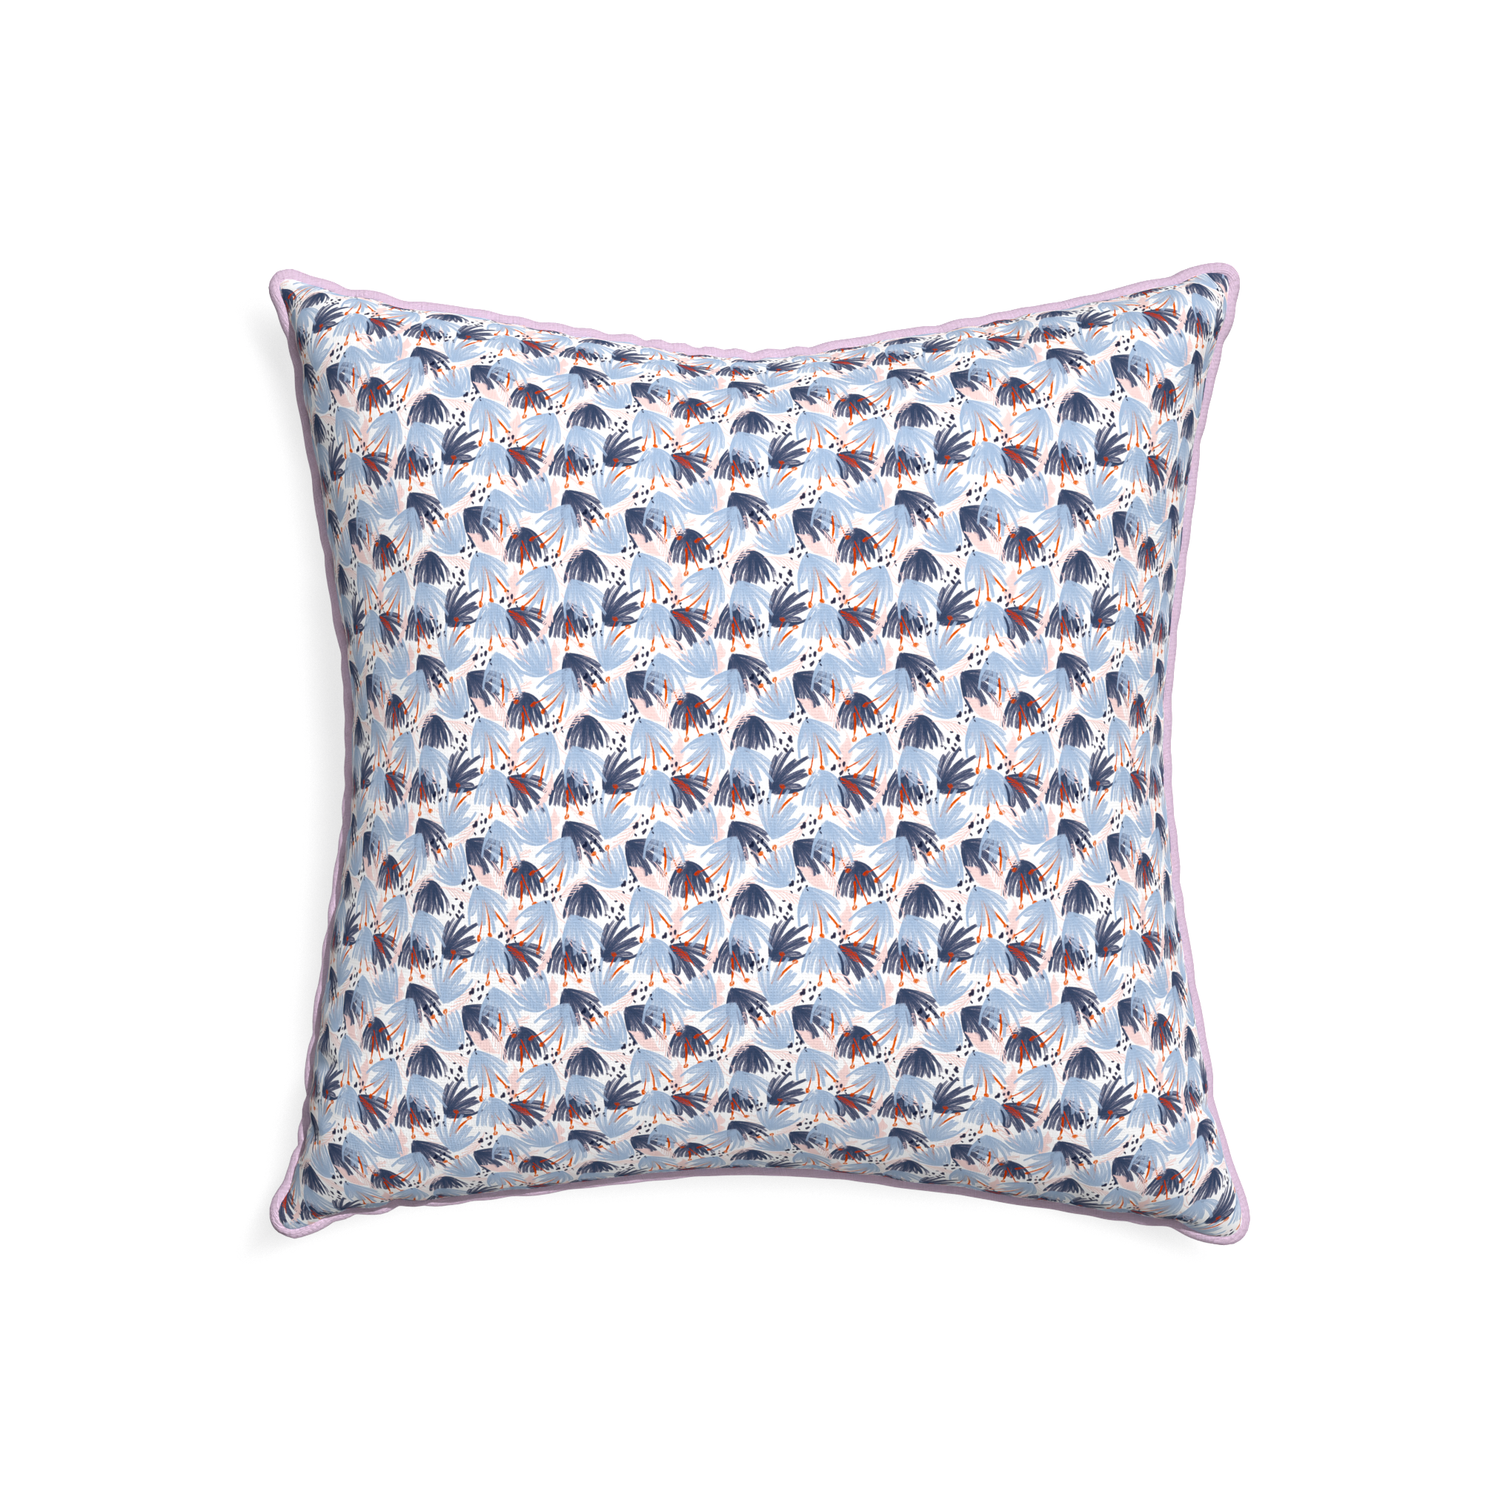 22-square eden blue custom pillow with l piping on white background